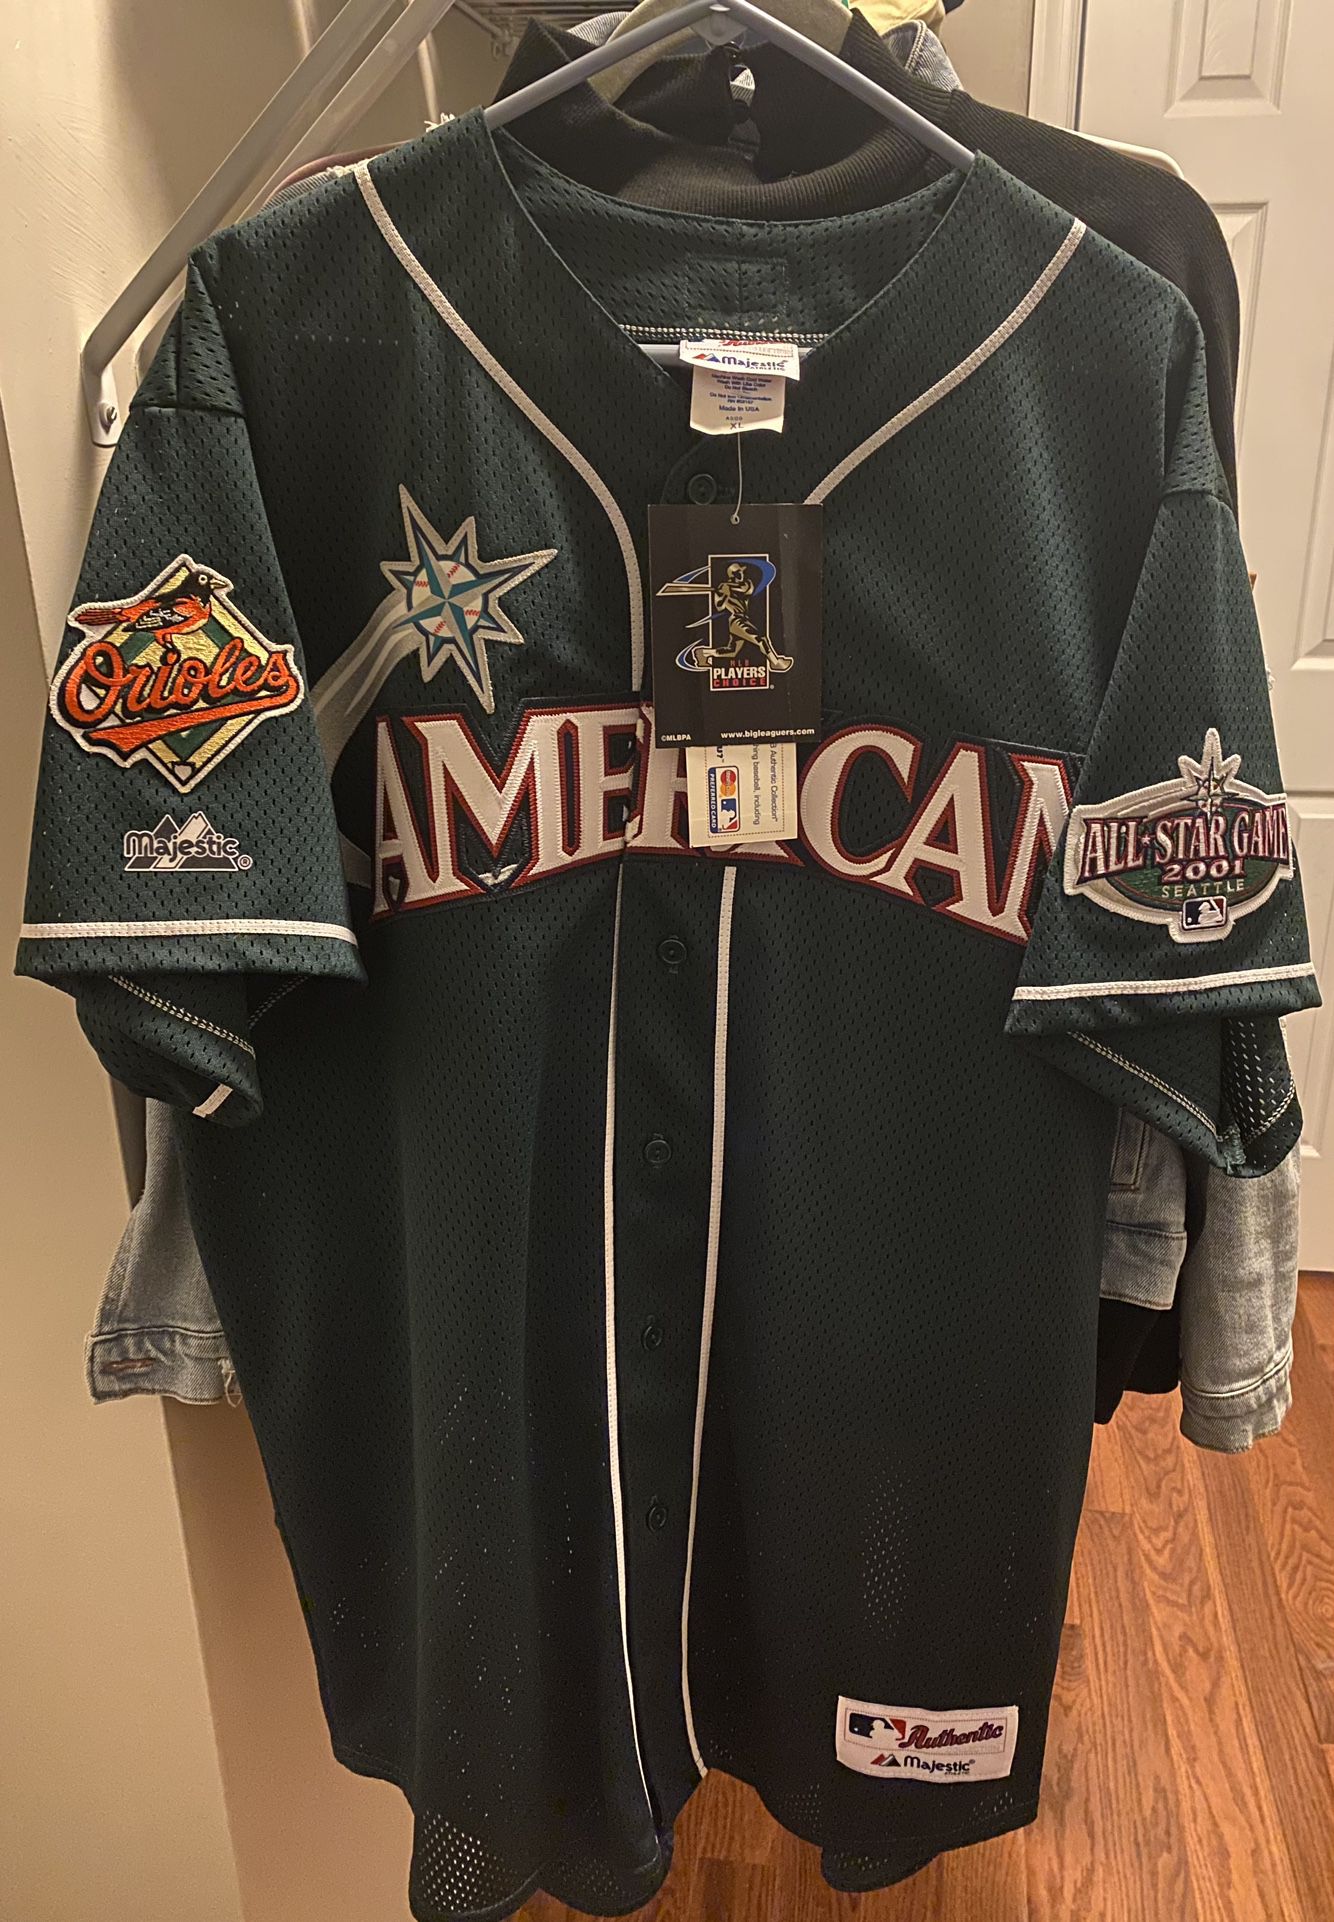 2001 Cal Ripken Jr American League All Star Jersey XL BRAND NEW WITH TAGS  for Sale in Stephens City, VA - OfferUp